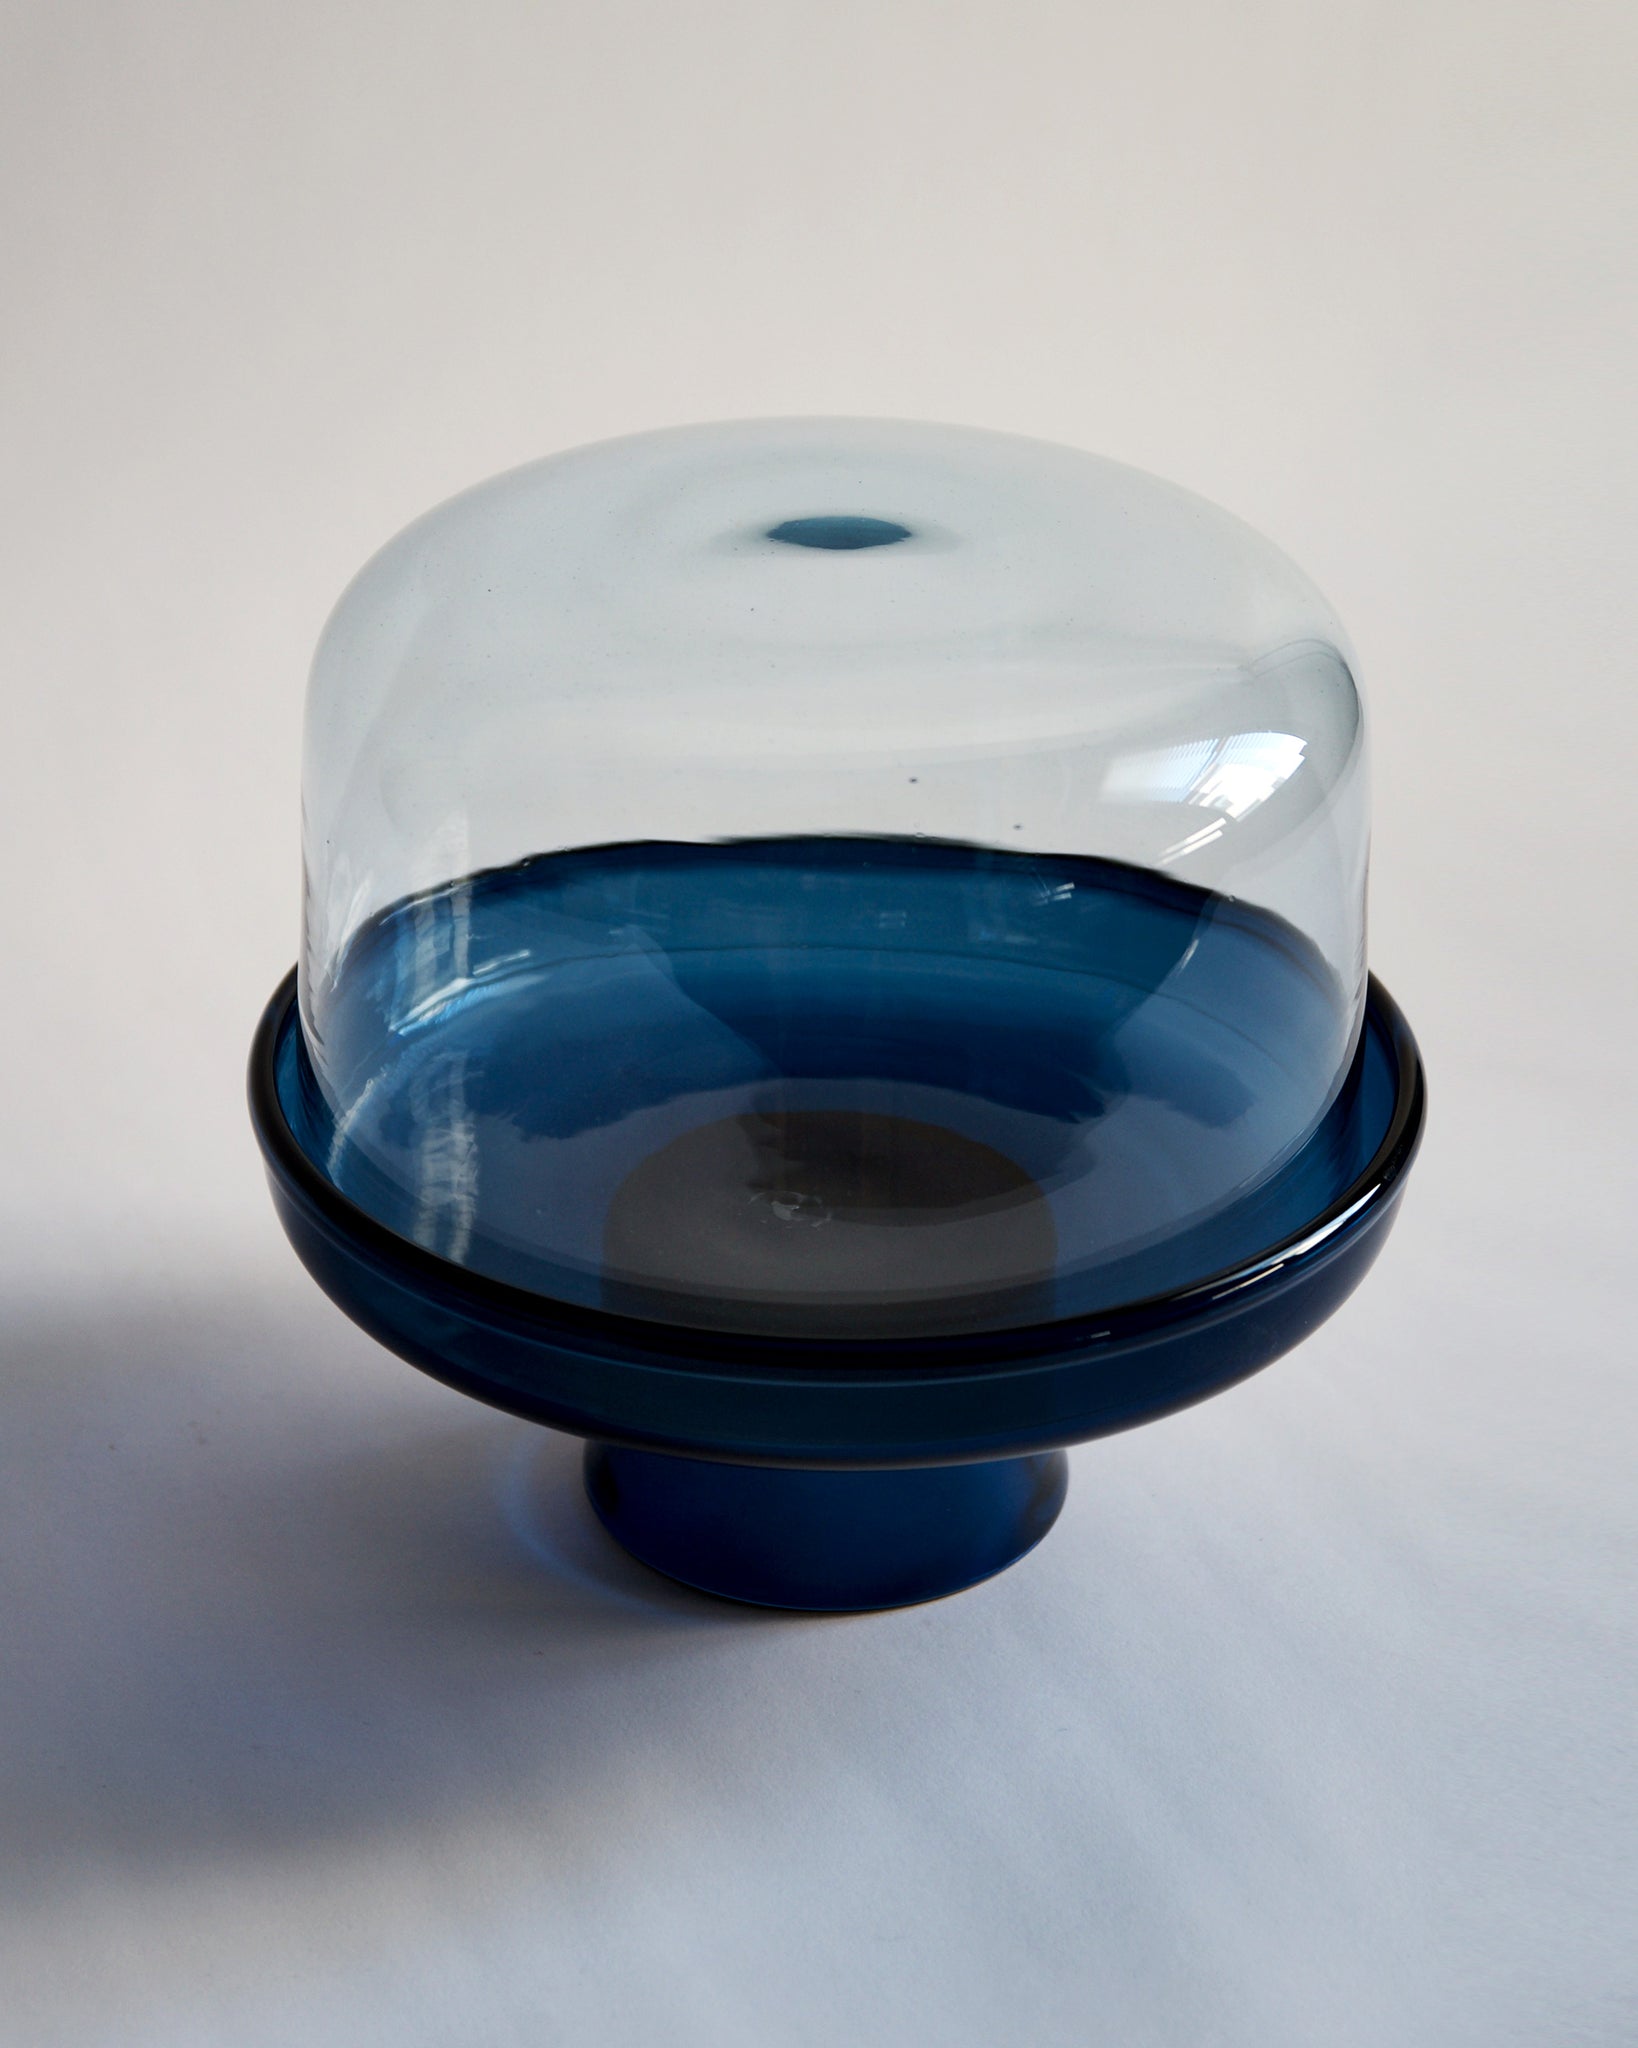 Top view of the reclaimed blue comport and dome. Comport is dark blue and dome is light clear blue.